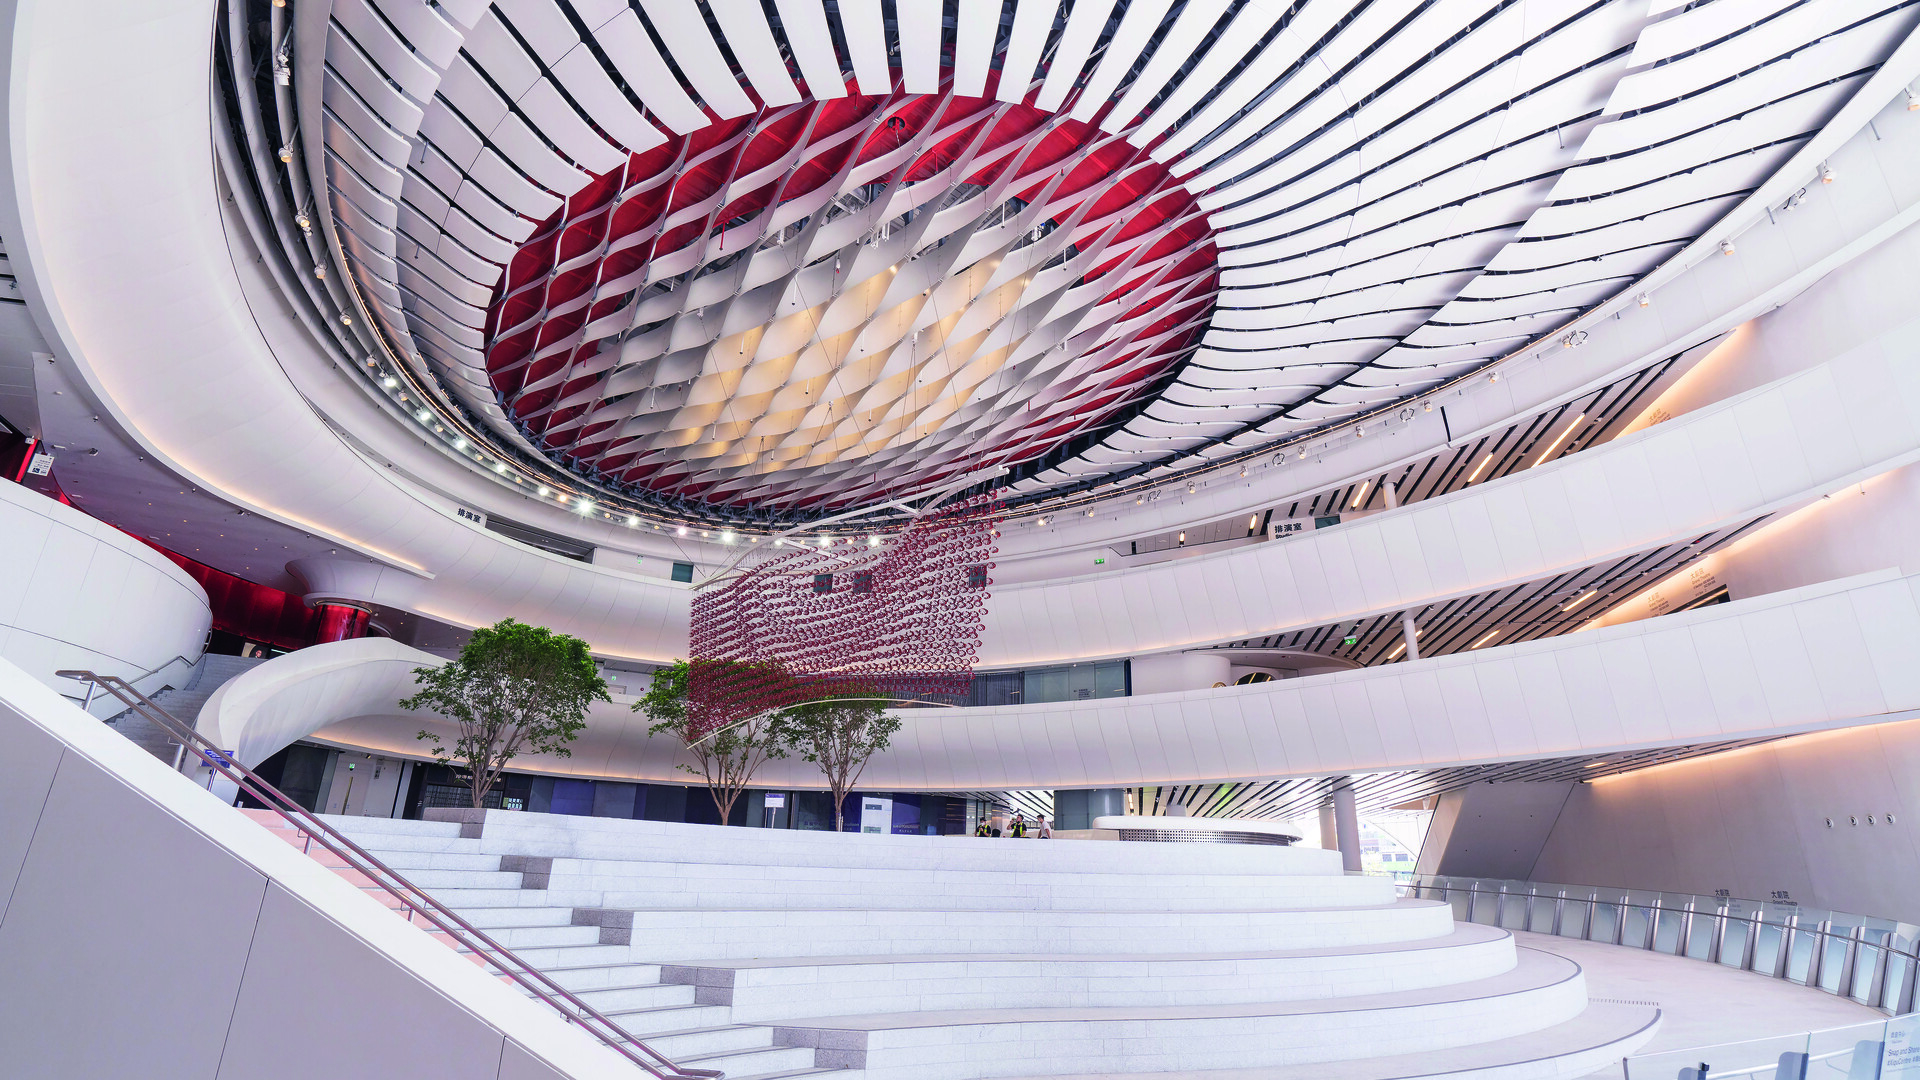 Curved architectural design of a building&#x27;s interior with sweeping staircases and an intricate ceiling